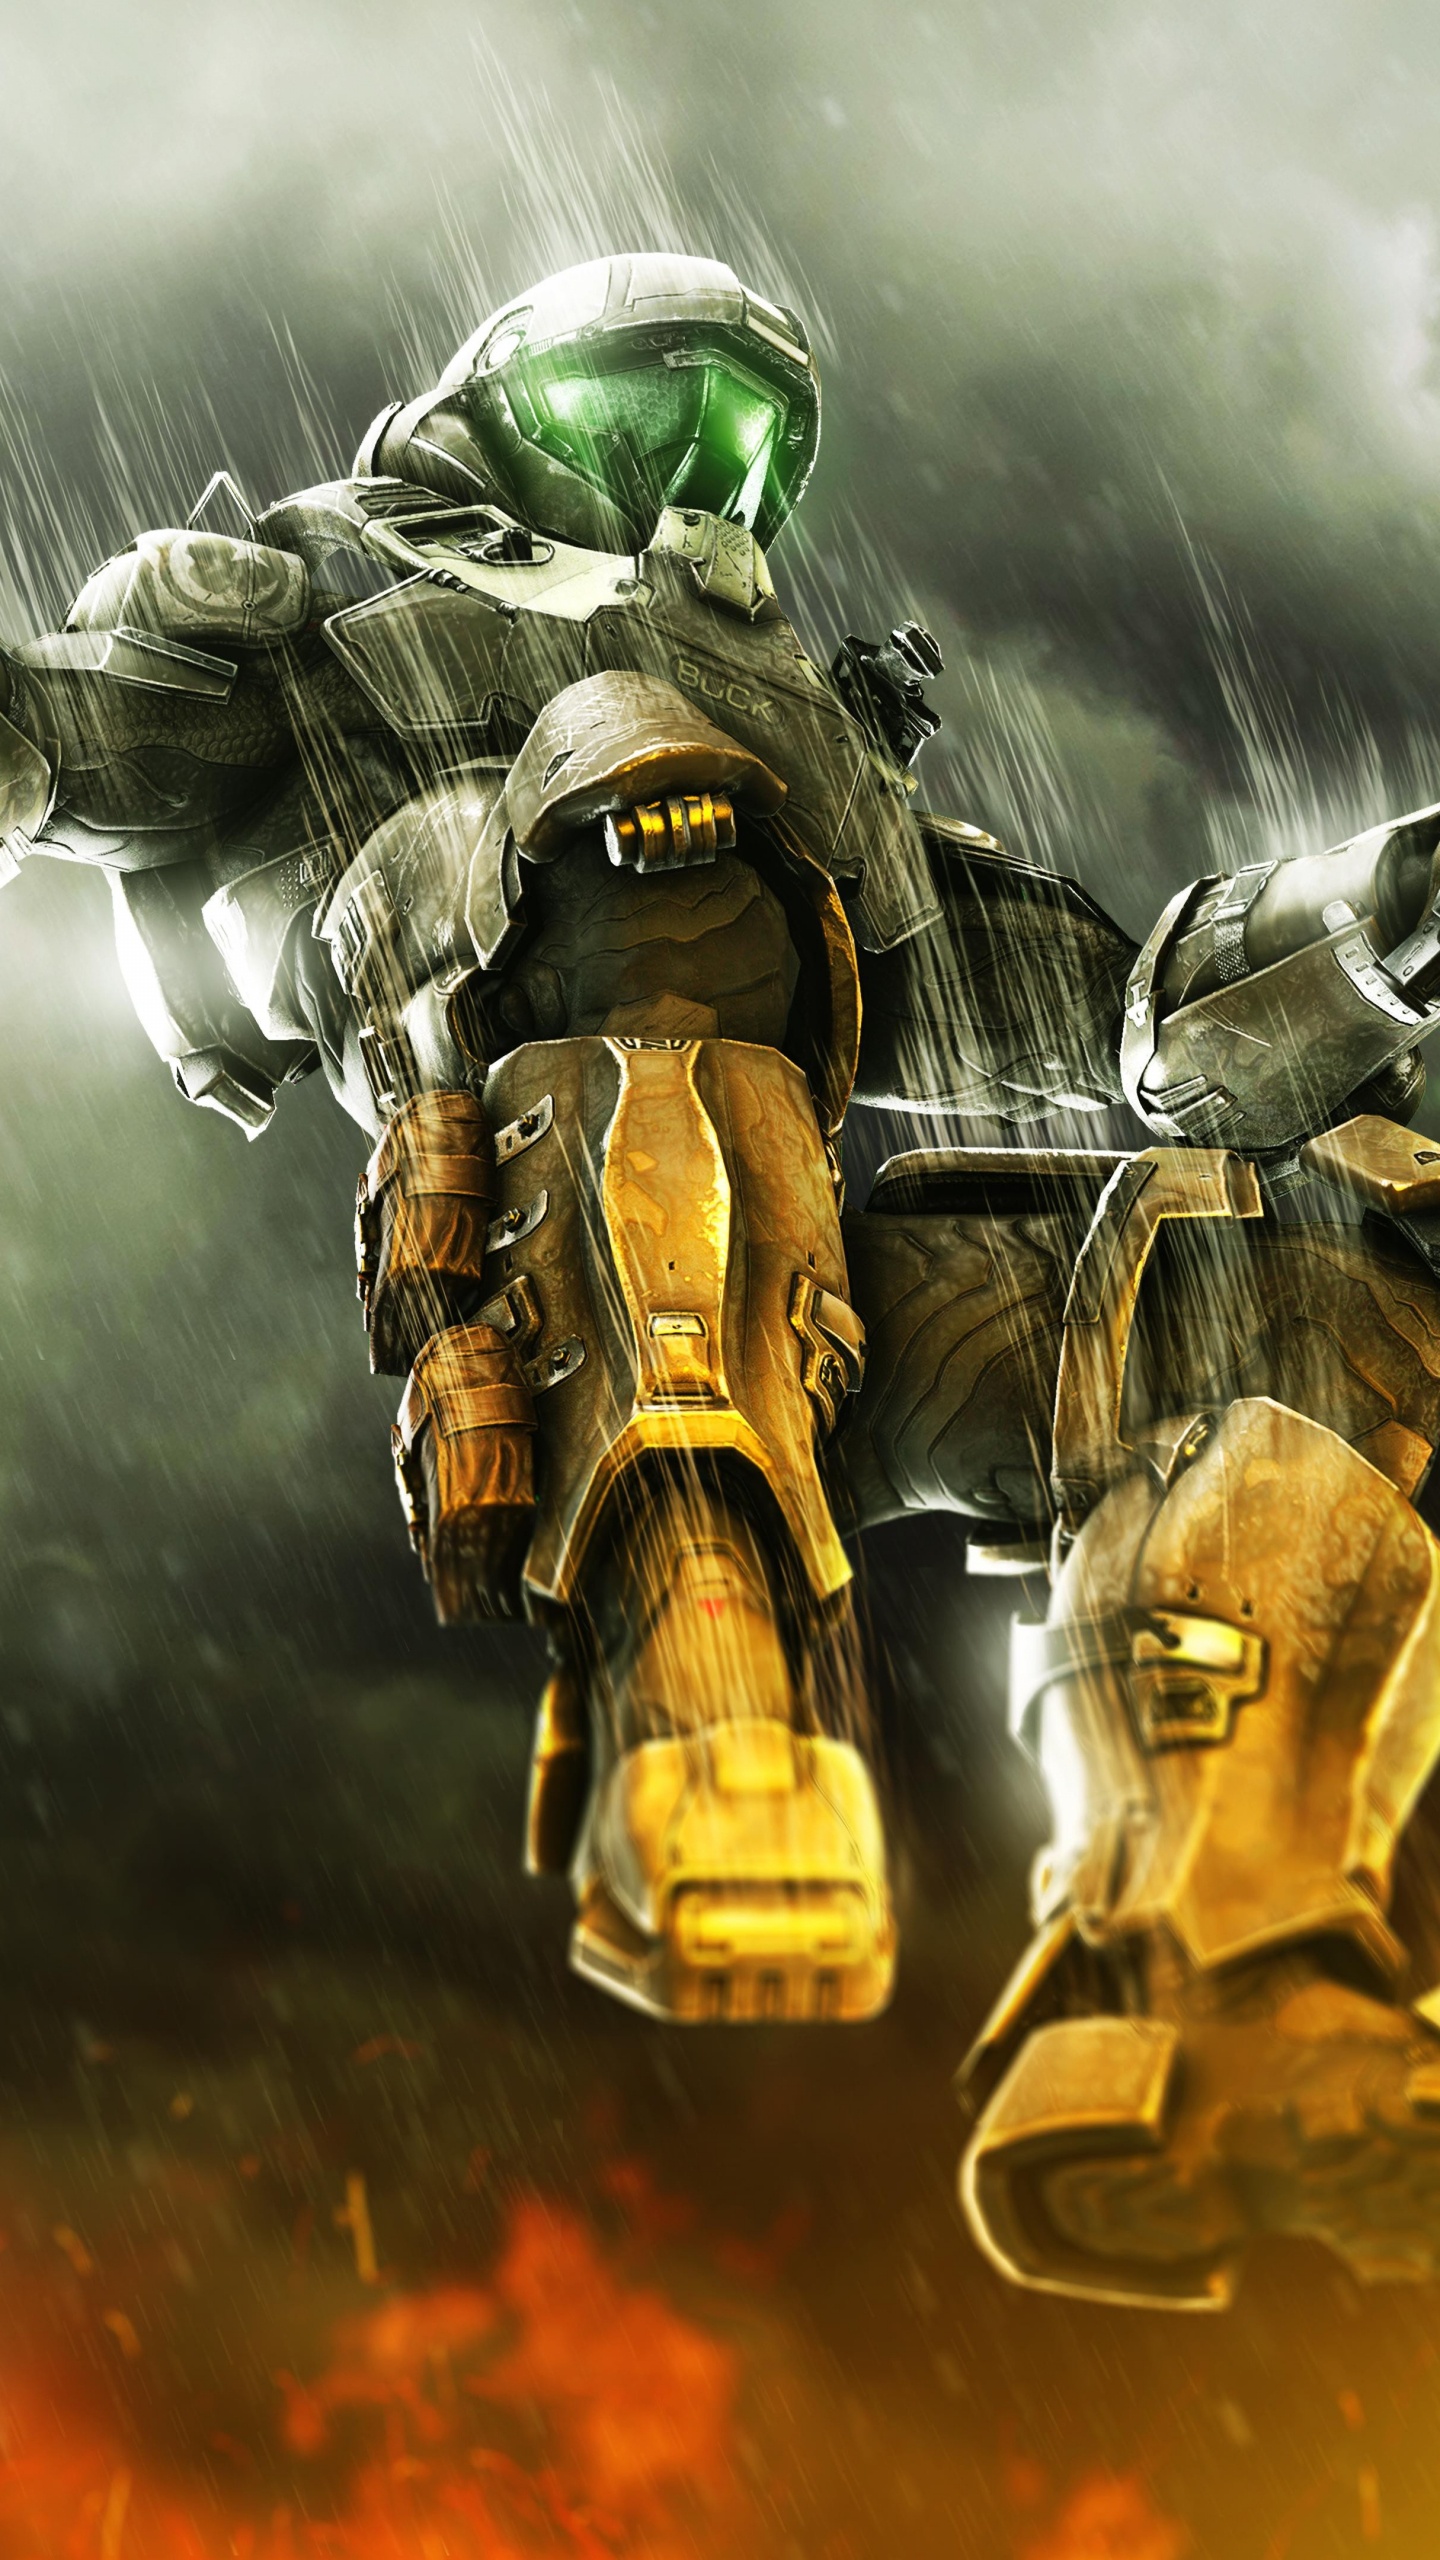 Halo 3, Master Chief, pc Game, Freestyle Motocross, Motocross. Wallpaper in 1440x2560 Resolution